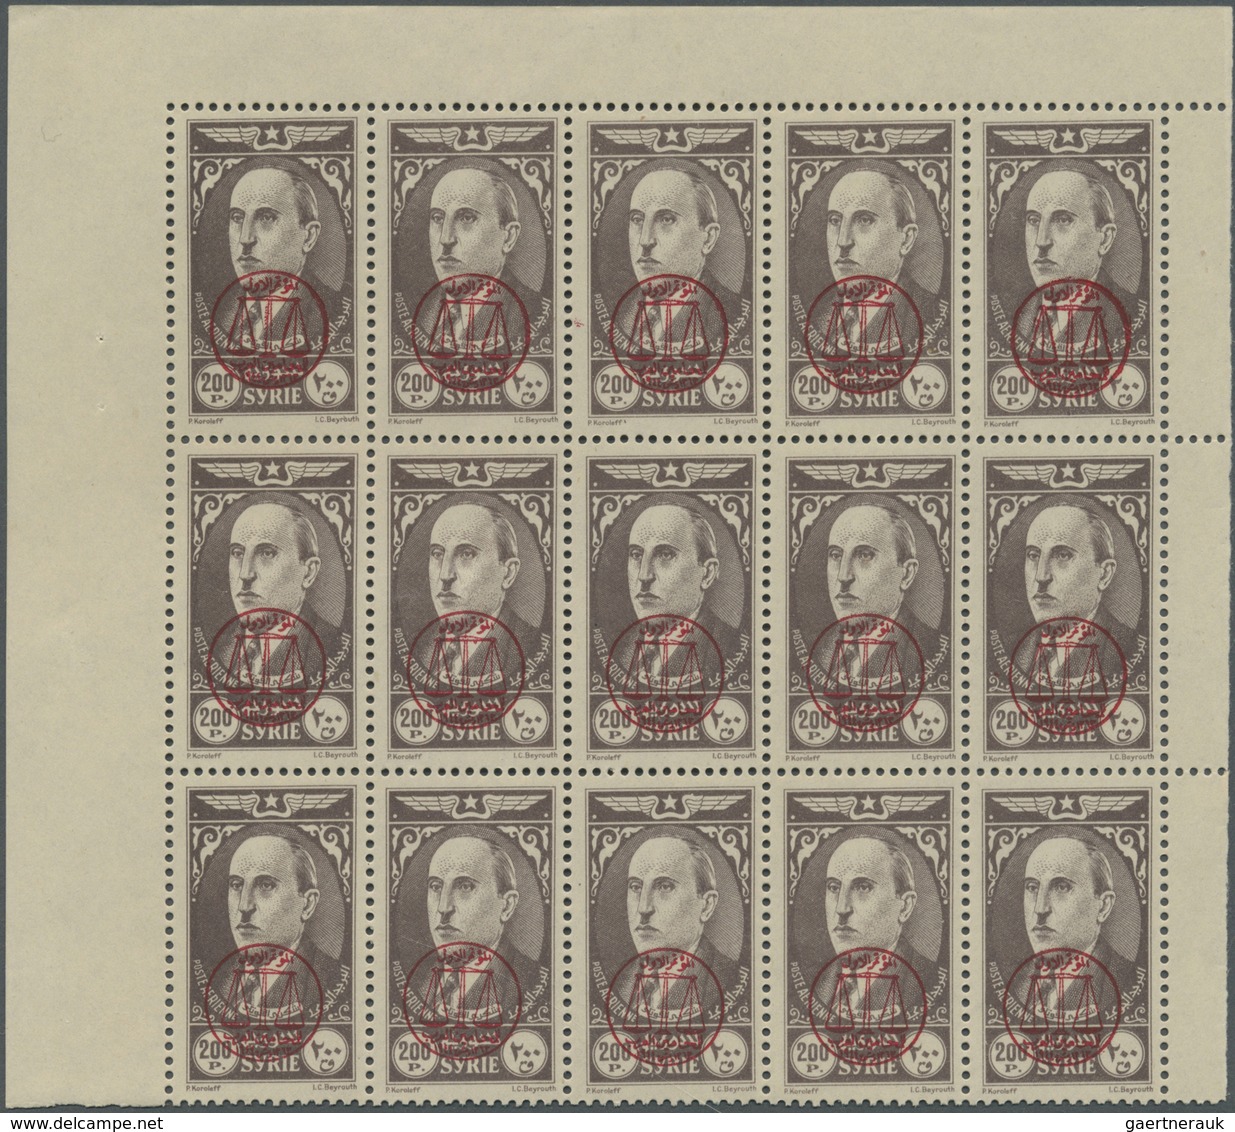 ** Syrien: 1944, Law Congress Complete Set In Blocks Of 15, Mint Never Hinged, Michel Catalogue Value 5 - Syria